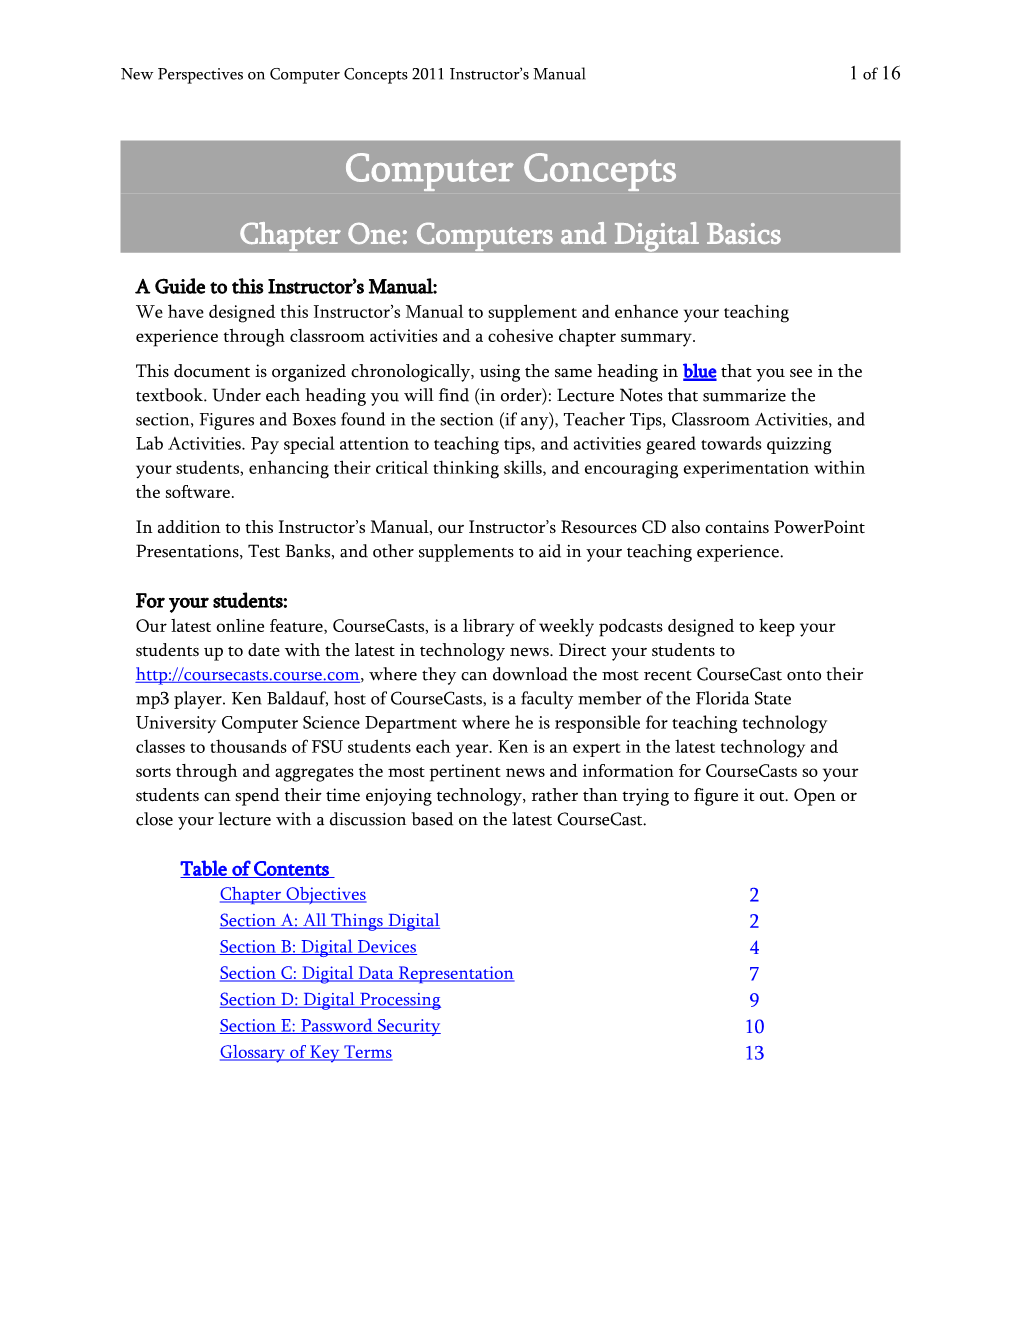 Chapter One: Computers and Digital Basics